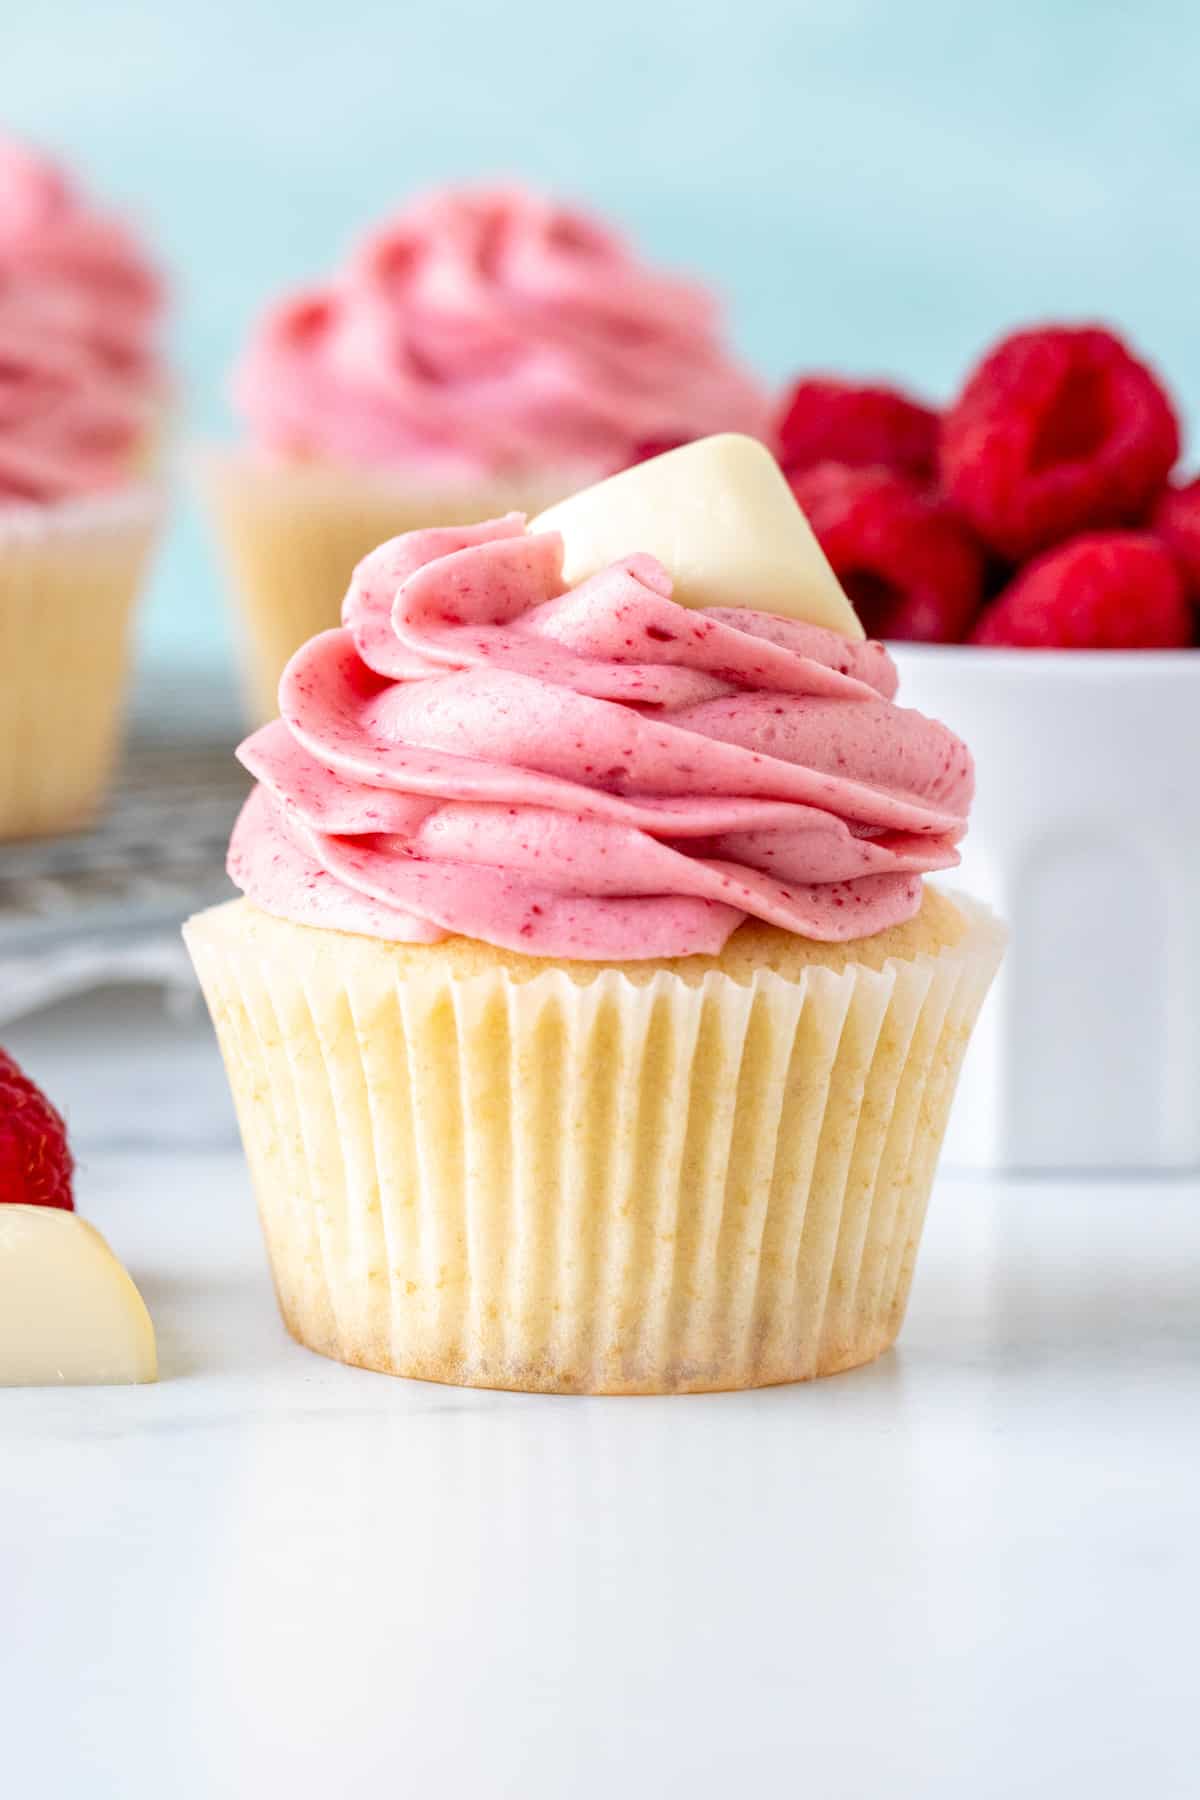 White chocolate raspberry cupcake with small bowl of berries